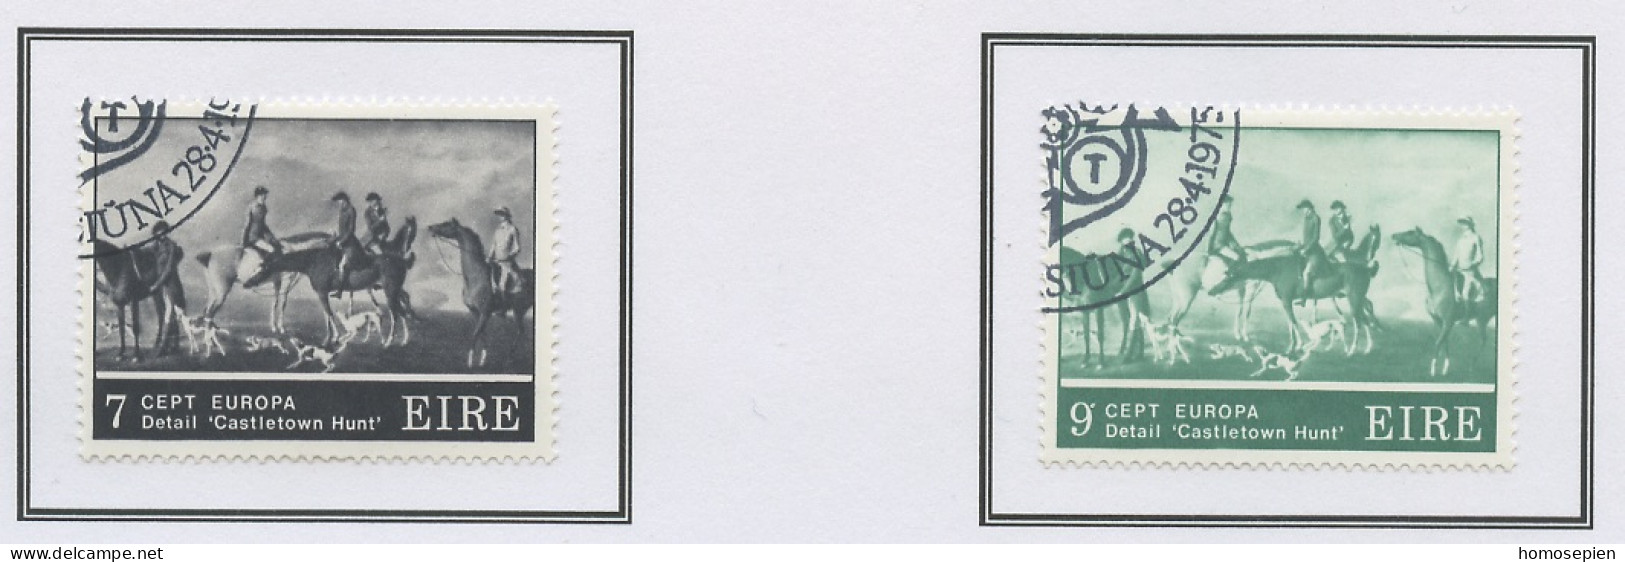 Irlande - Ireland - Irland 1975 Y&T N°317 à 318 - Michel N°315 à 316 (o) - EUROPA - Used Stamps